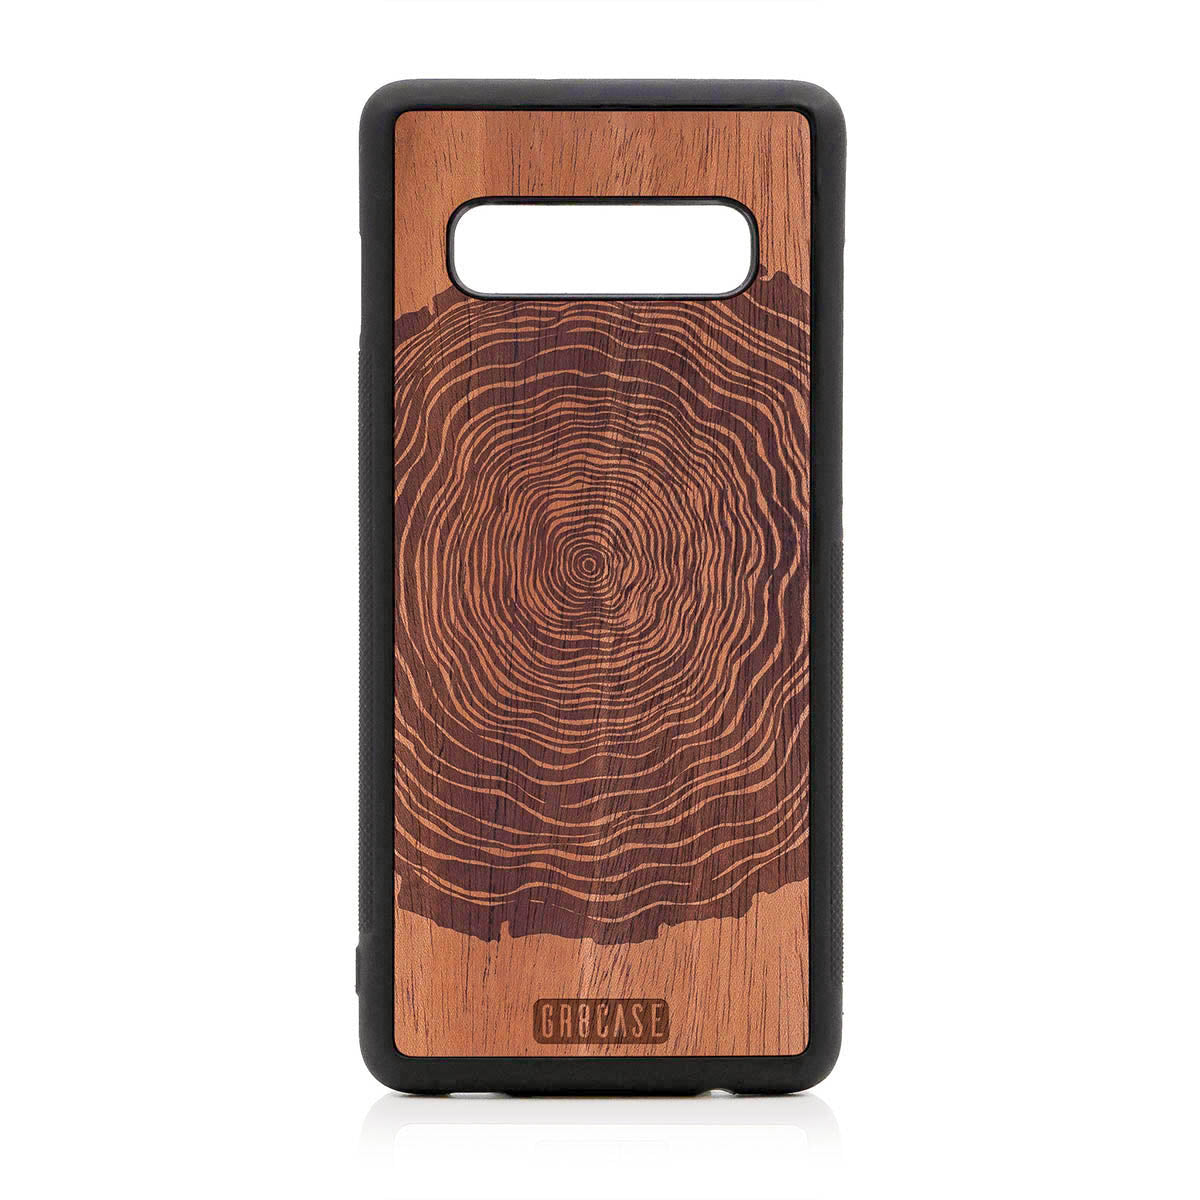 Tree Rings Design Wood Case For Samsung Galaxy S10 Plus